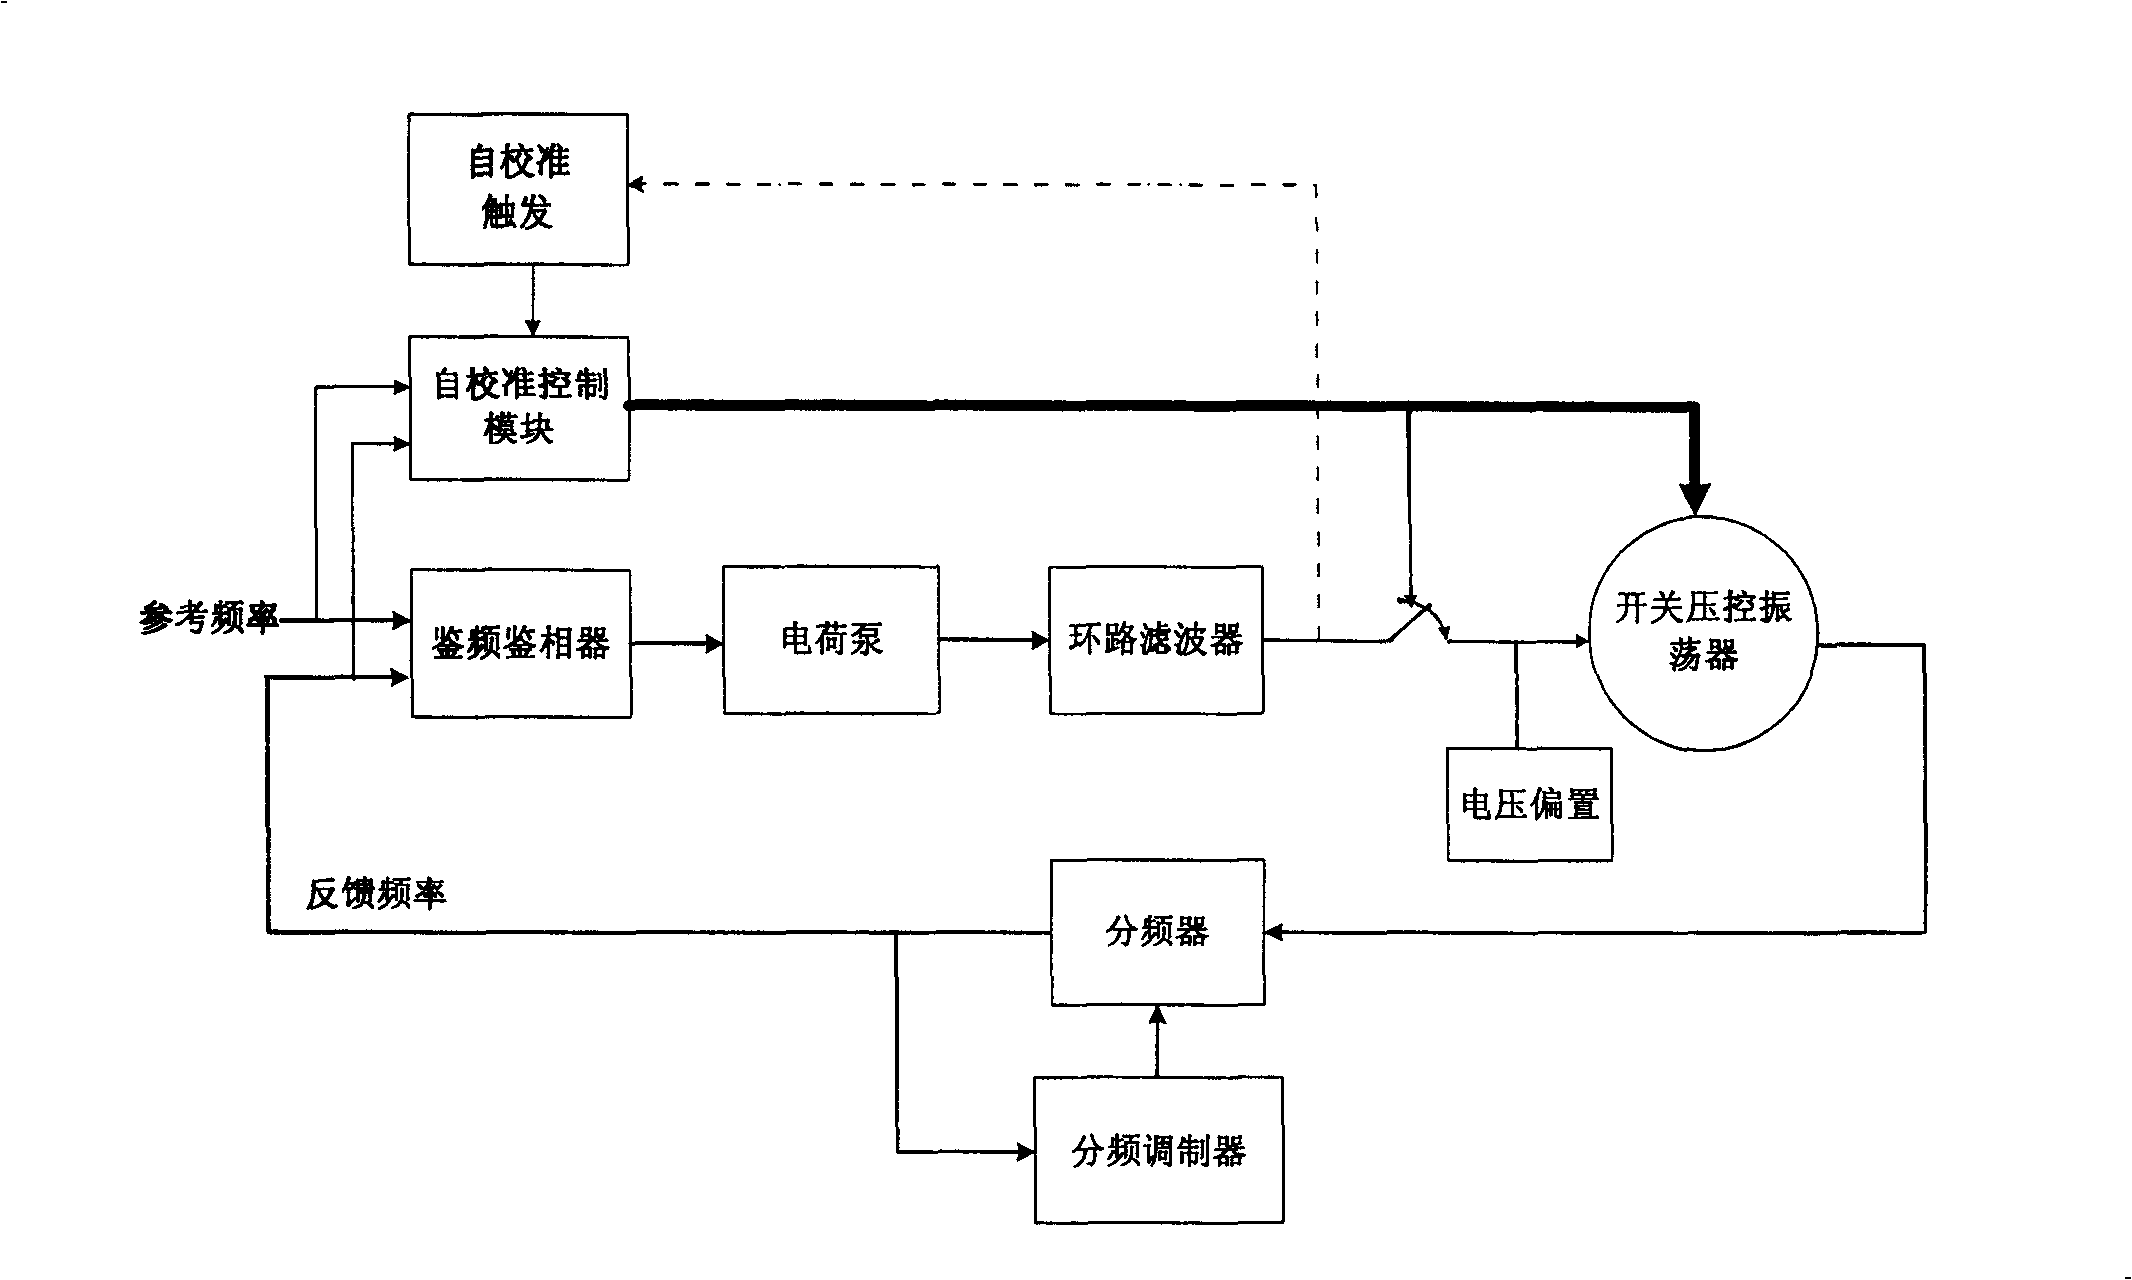 Frequency adjusting method of oscillator and decimal fraction frequency dividing phase-locked loop frequency synthesizer